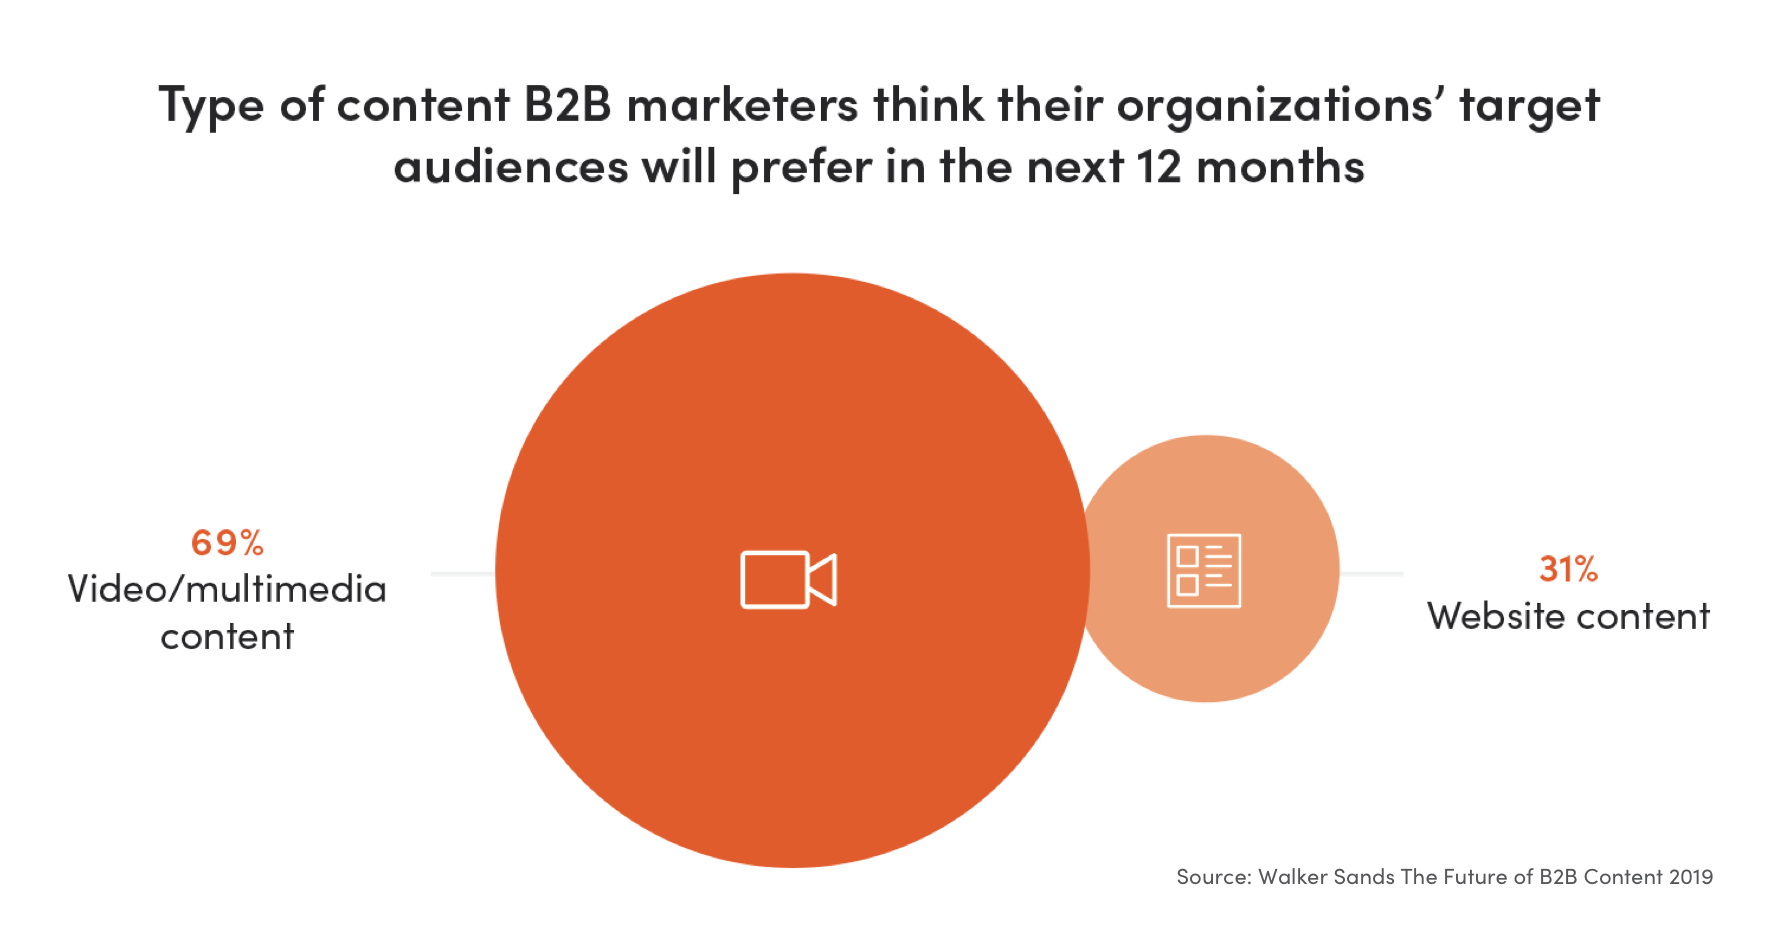 Data visualization of the type of content B2B marketers think their organizations' target audiences will prefer in the next 12 months